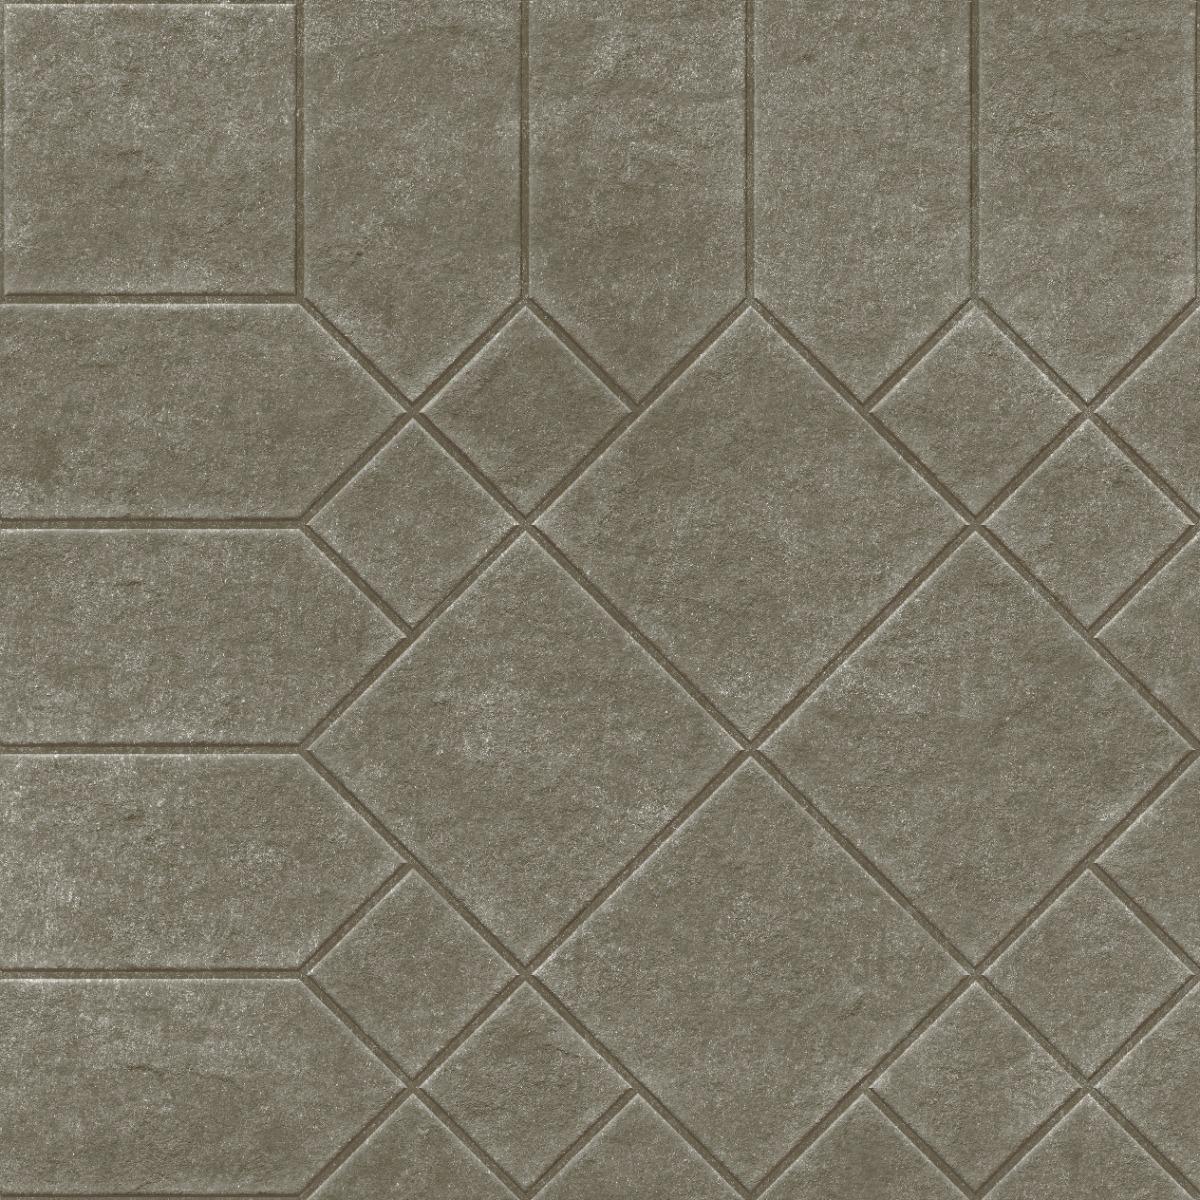 Tile Collection for Balcony Tiles, Parking Tiles, Terrace Tiles, Pathway Tiles, High Traffic Tiles, Commercial/Office, Outdoor Area